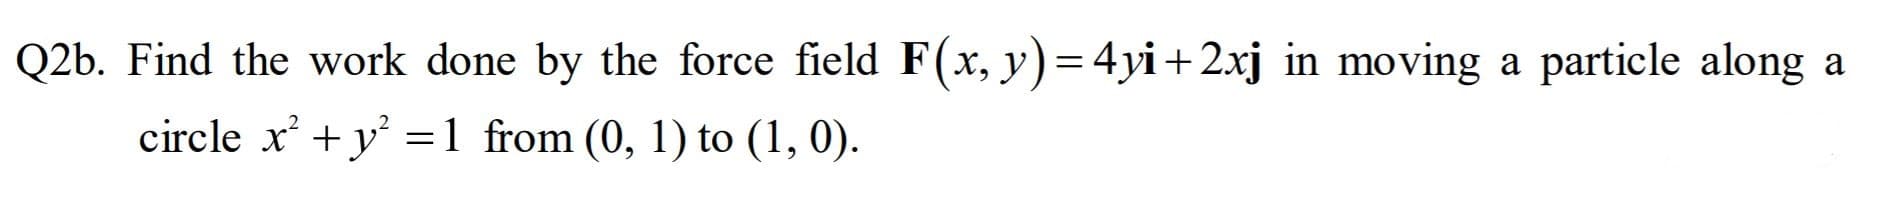 Q2b. Find the work done by the force field F(x, y)=4yi+2xj in moving a particle along a
circle x + y' =1 from (0, 1) to (1, 0).
